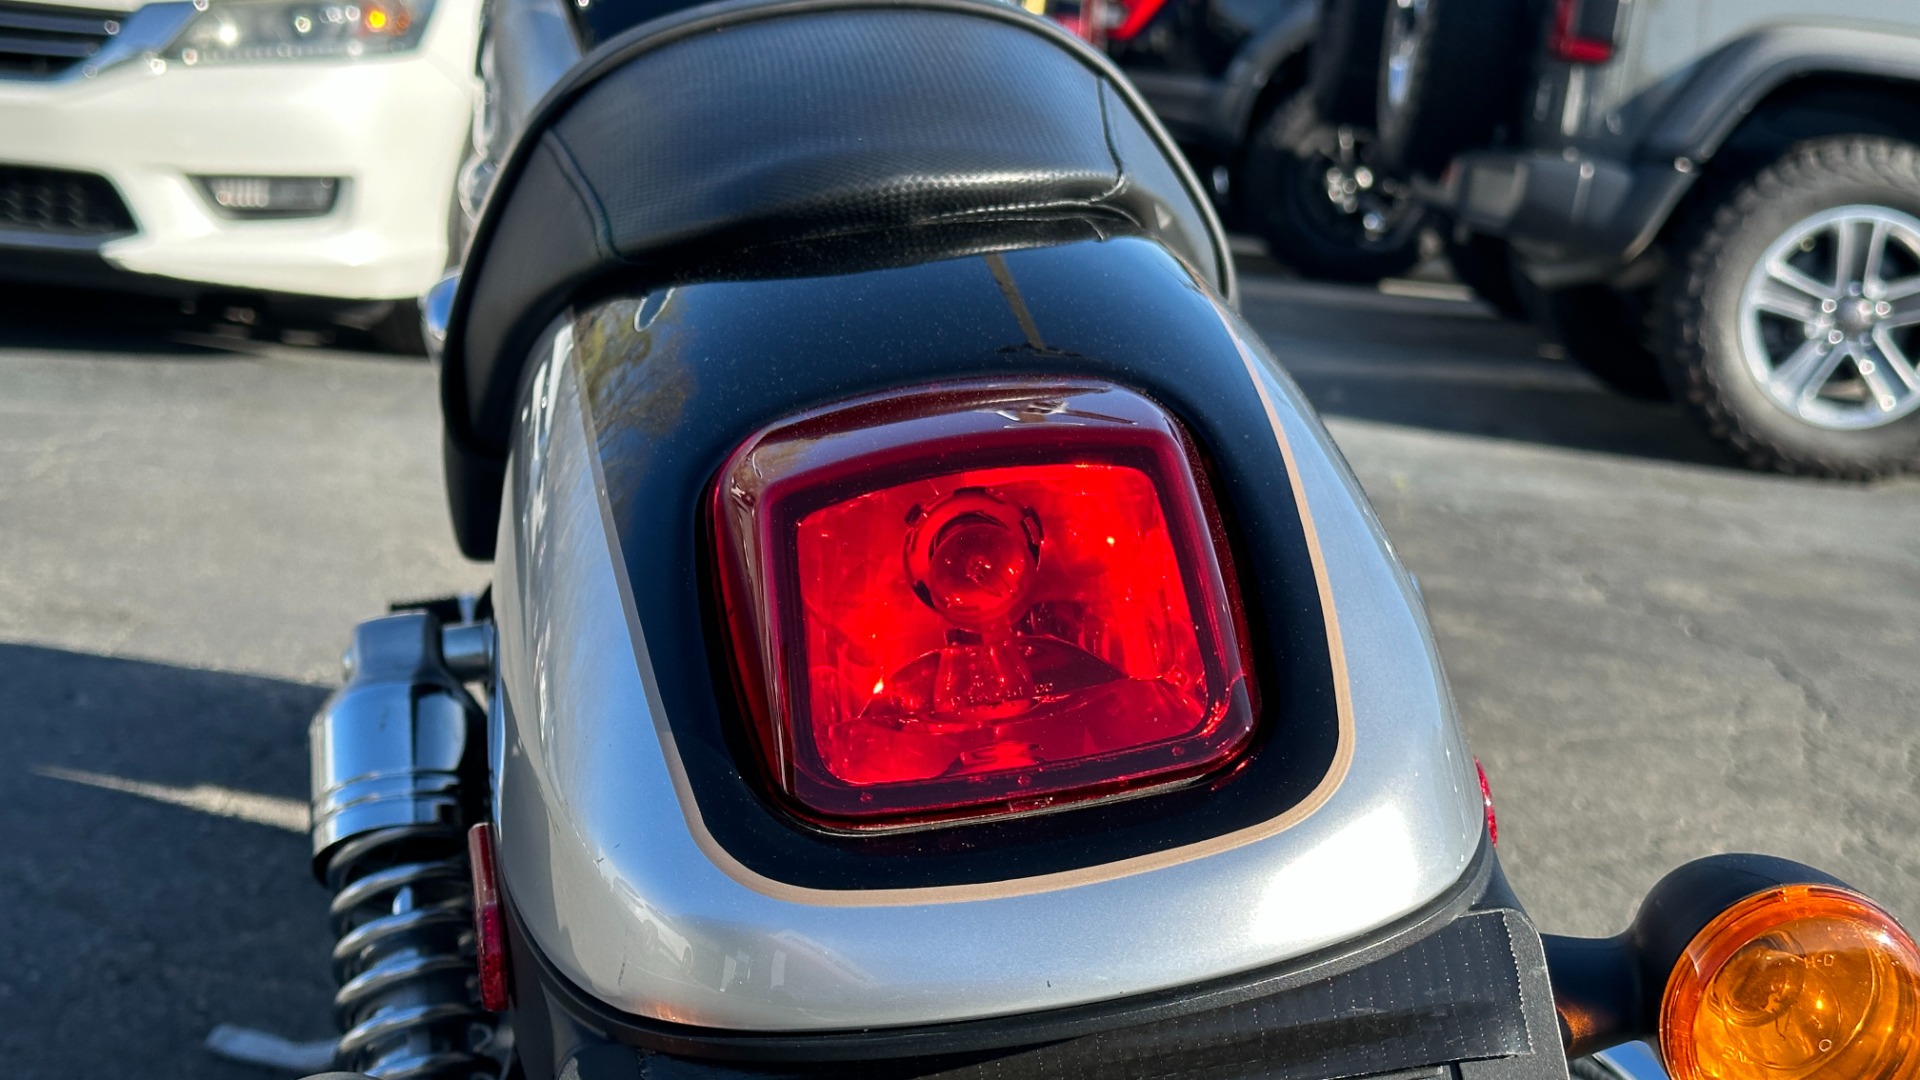 Used 2003 Harley Davidson V Rod ANNIVERSARY EDITION / 1130CC ENGINE / BREMBO BRAKES / VORTEX AIR SCOOPS for sale $7,995 at Formula Imports in Charlotte NC 28227 35